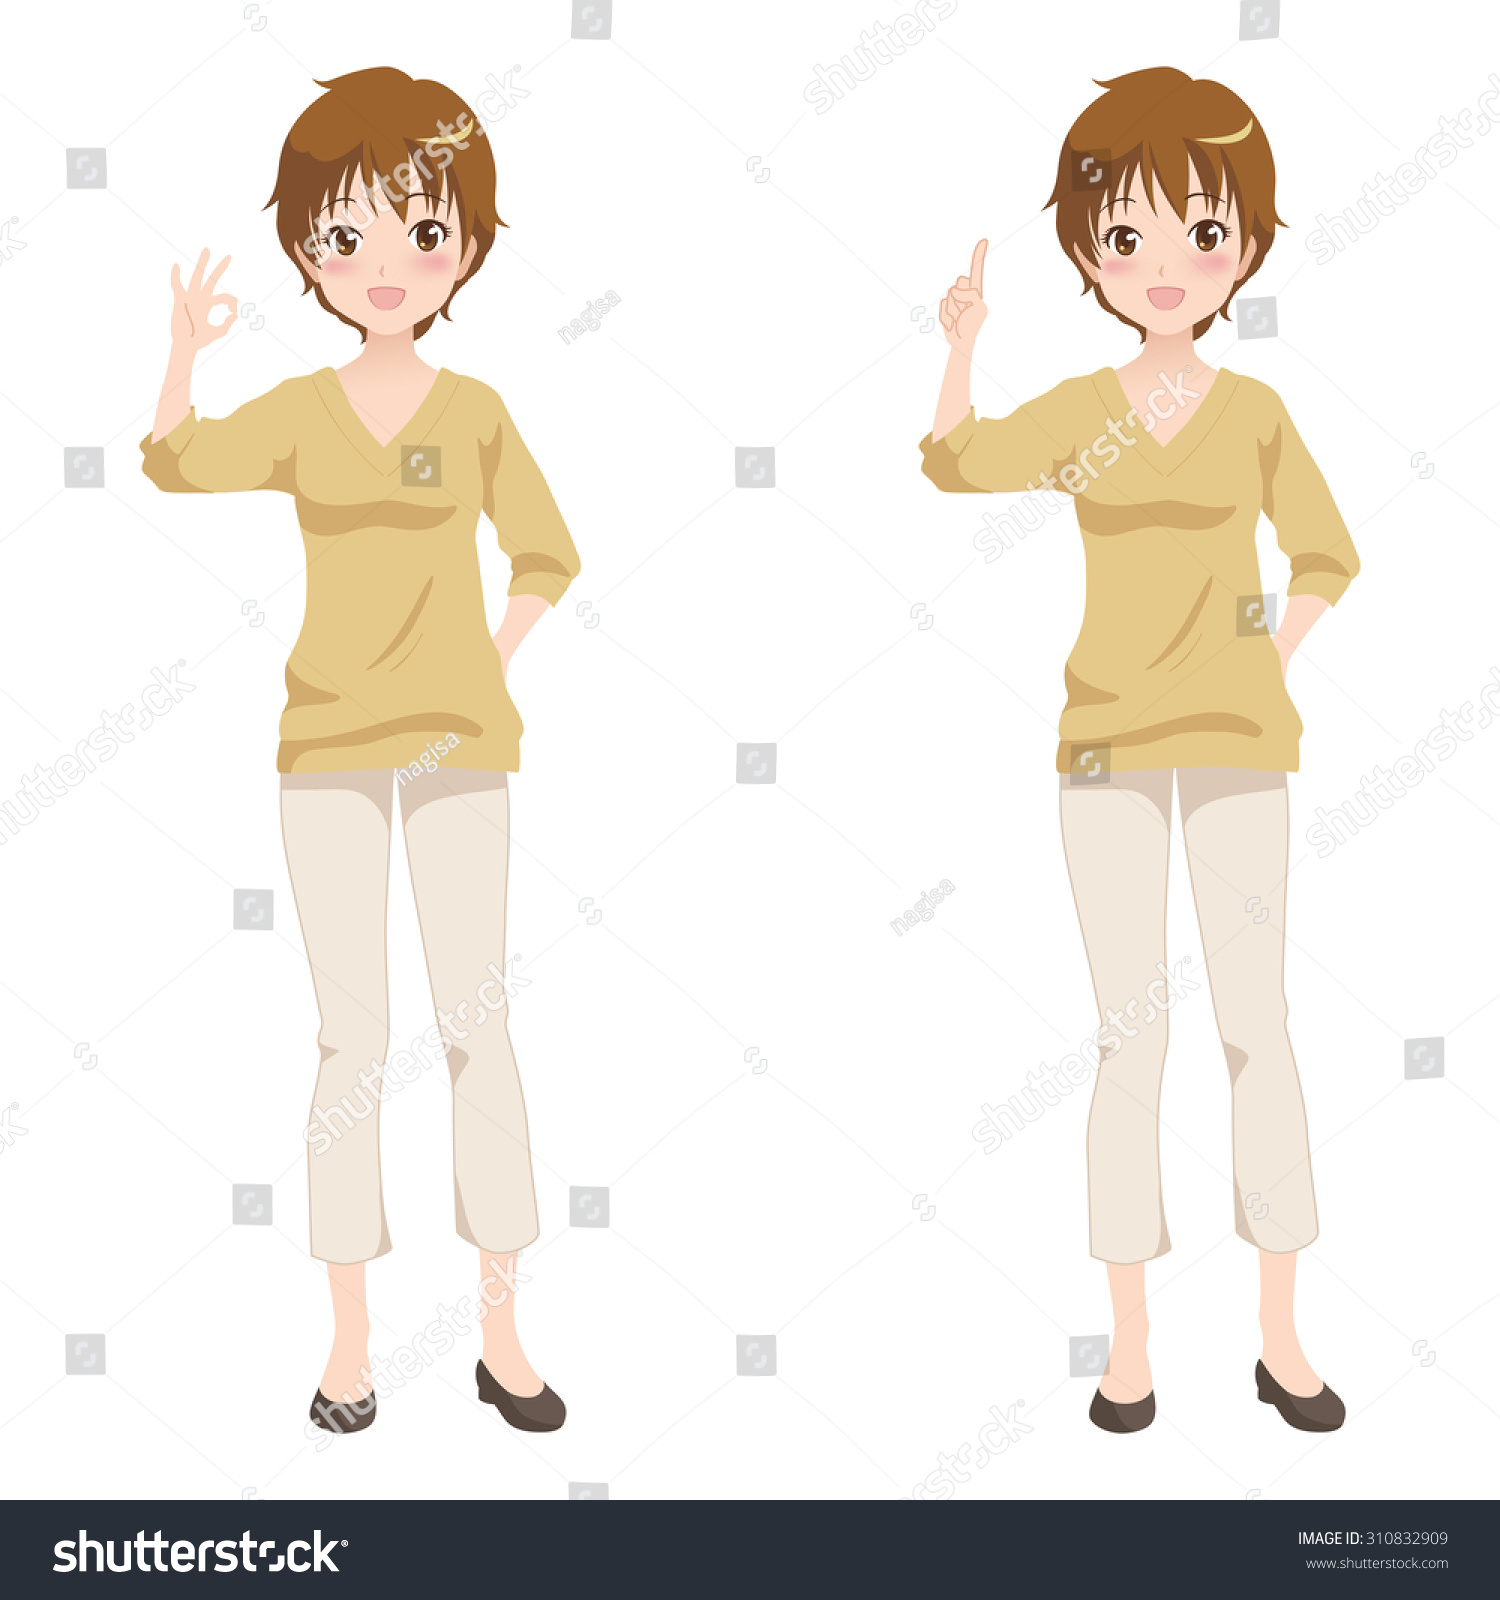 Woman Pose Stock Vector Royalty Free Shutterstock